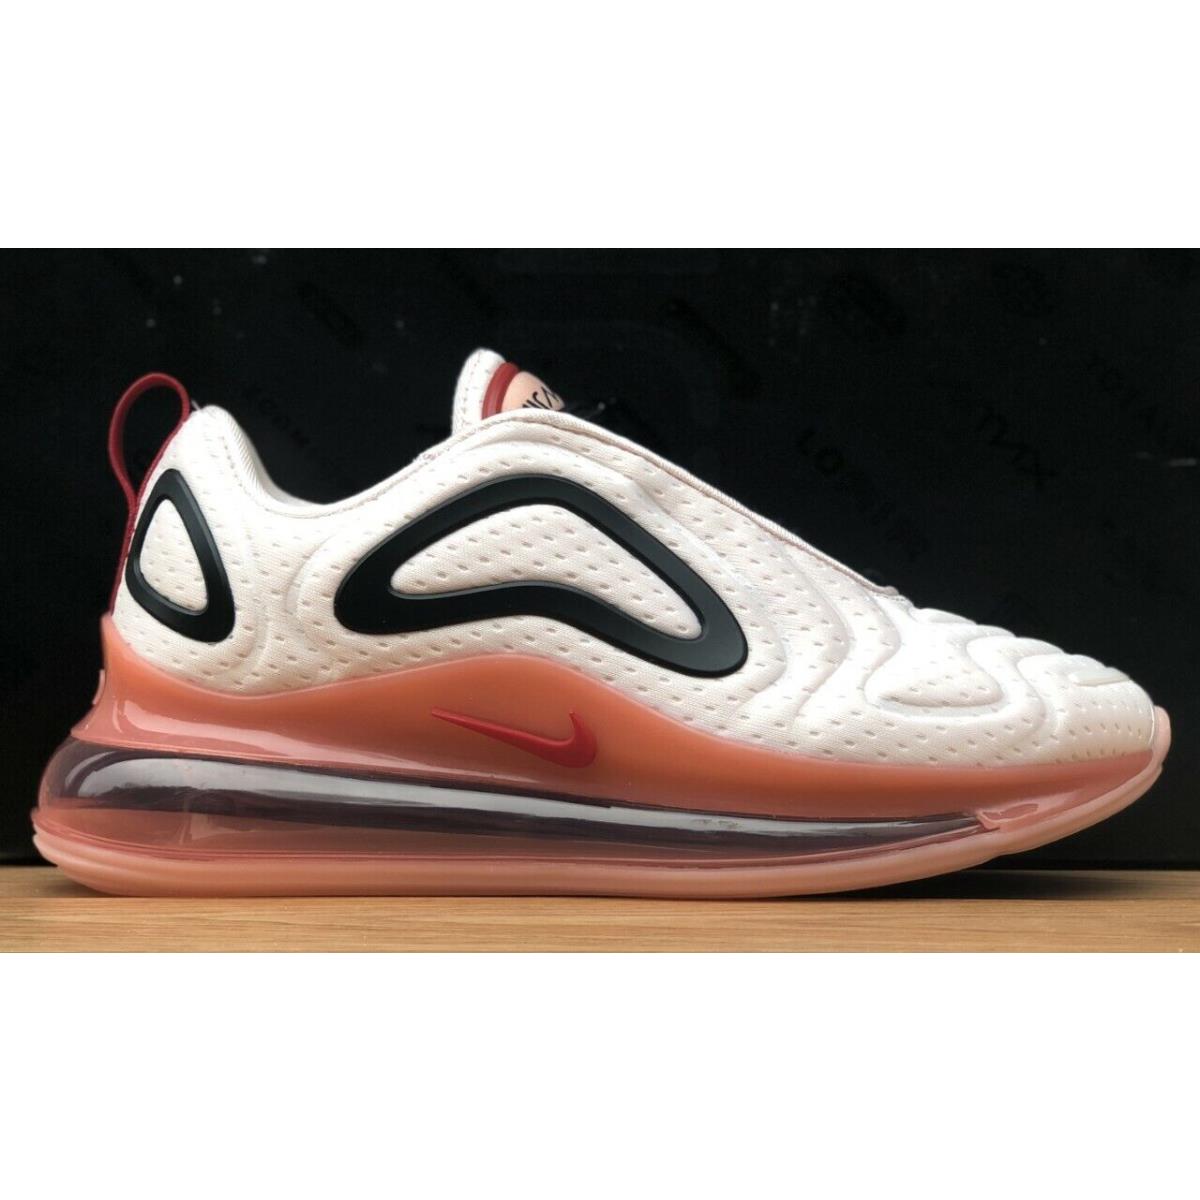 Nike Air Max 720 Running Shoes AR9293-602 Light Pink / Gym Red /black Womens